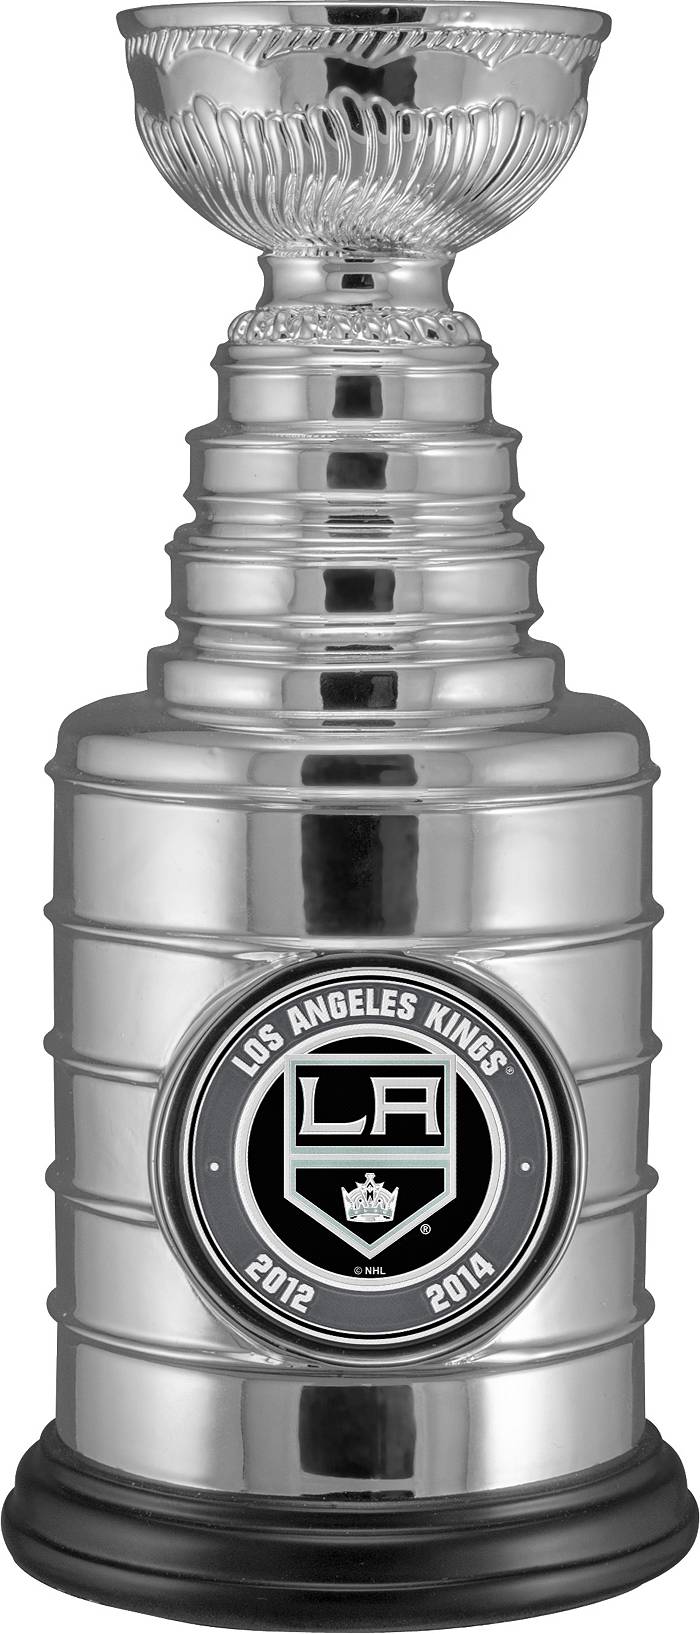 Los Angeles Kings 2020 Holiday Gift Guide